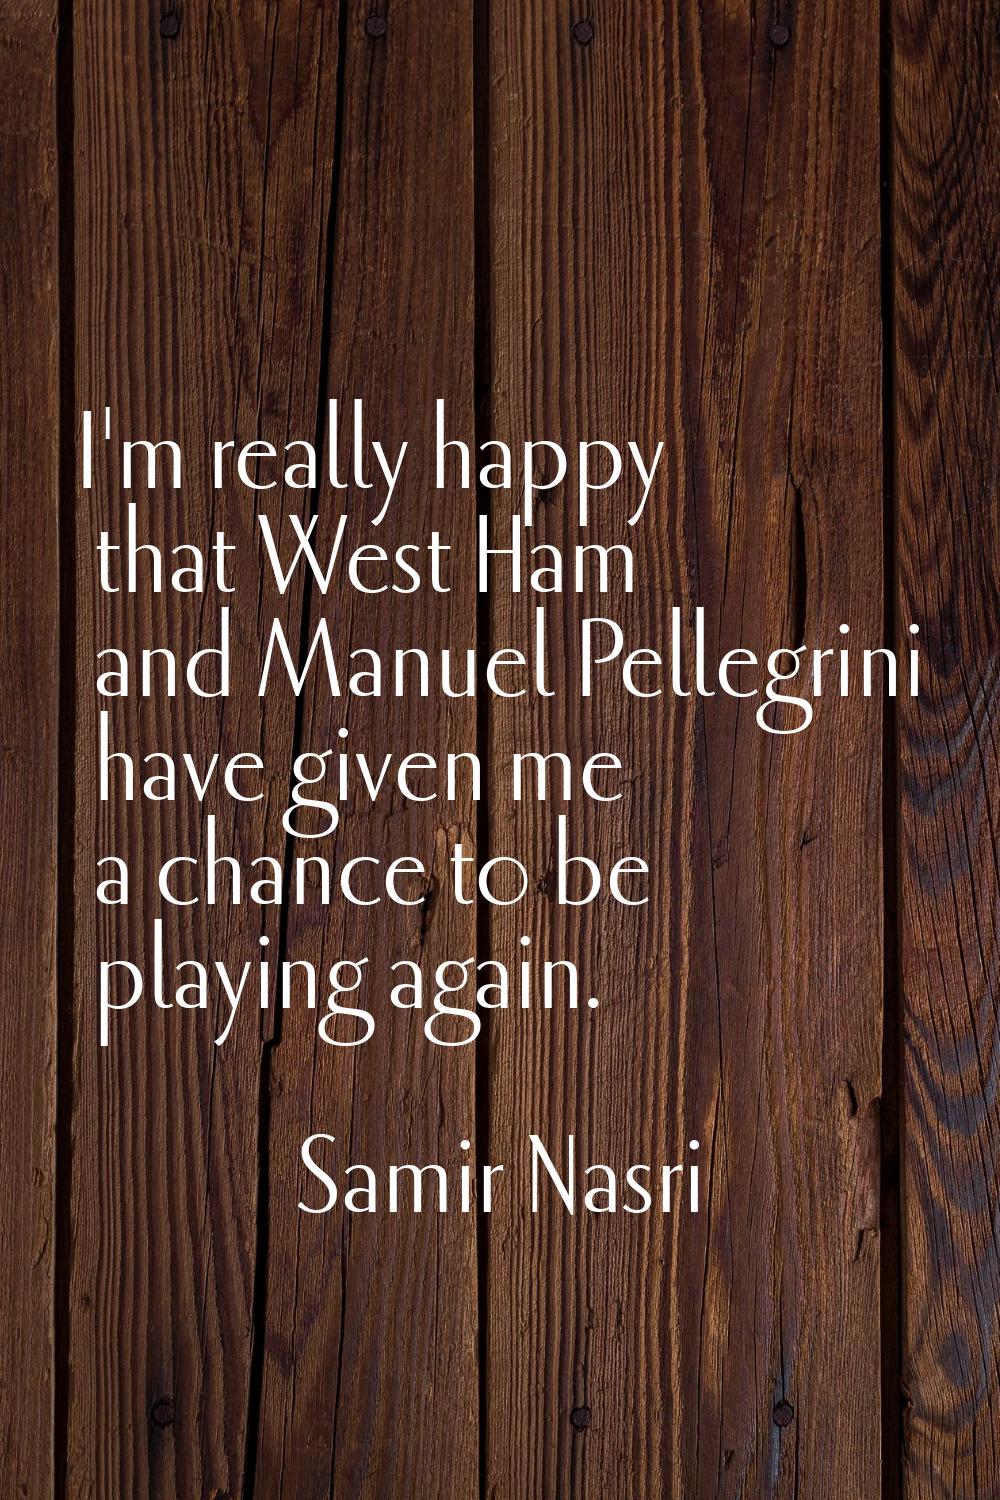 I'm really happy that West Ham and Manuel Pellegrini have given me a chance to be playing again.